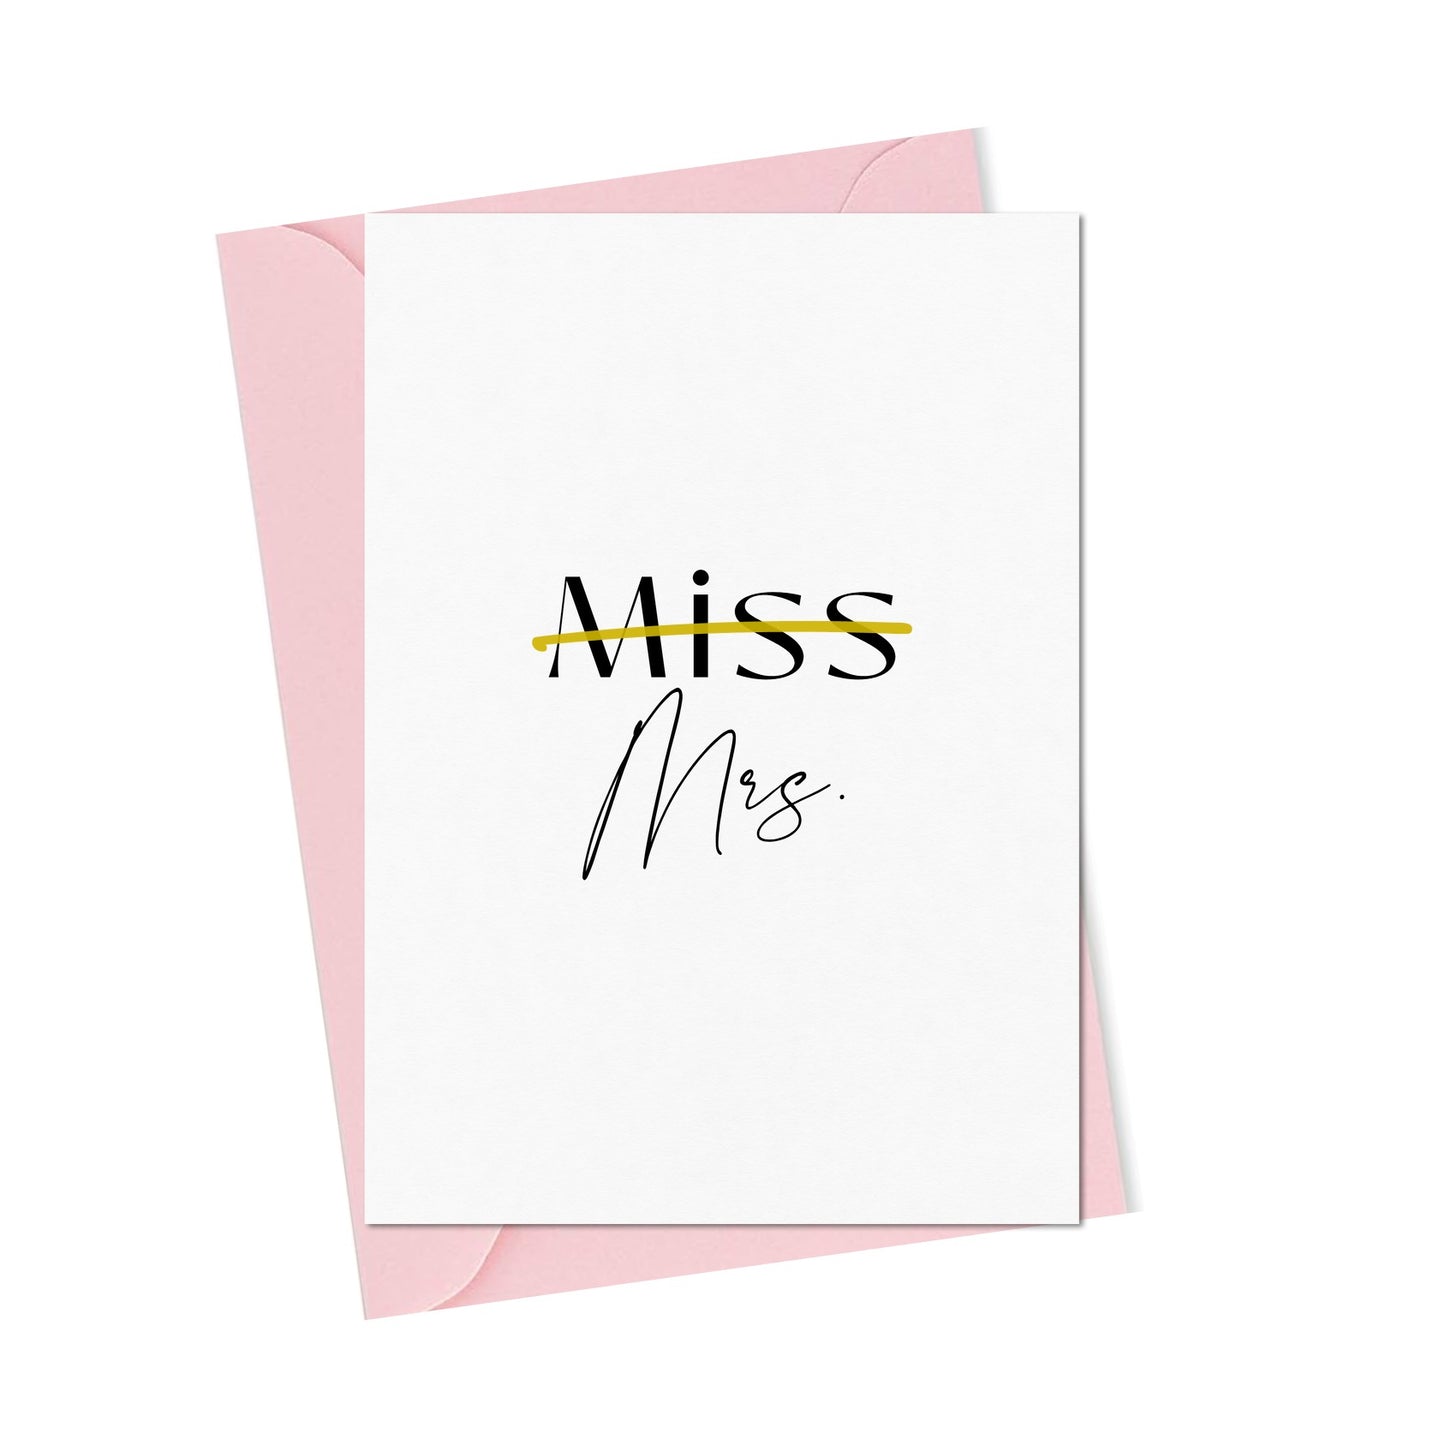 Miss to Mrs. Card